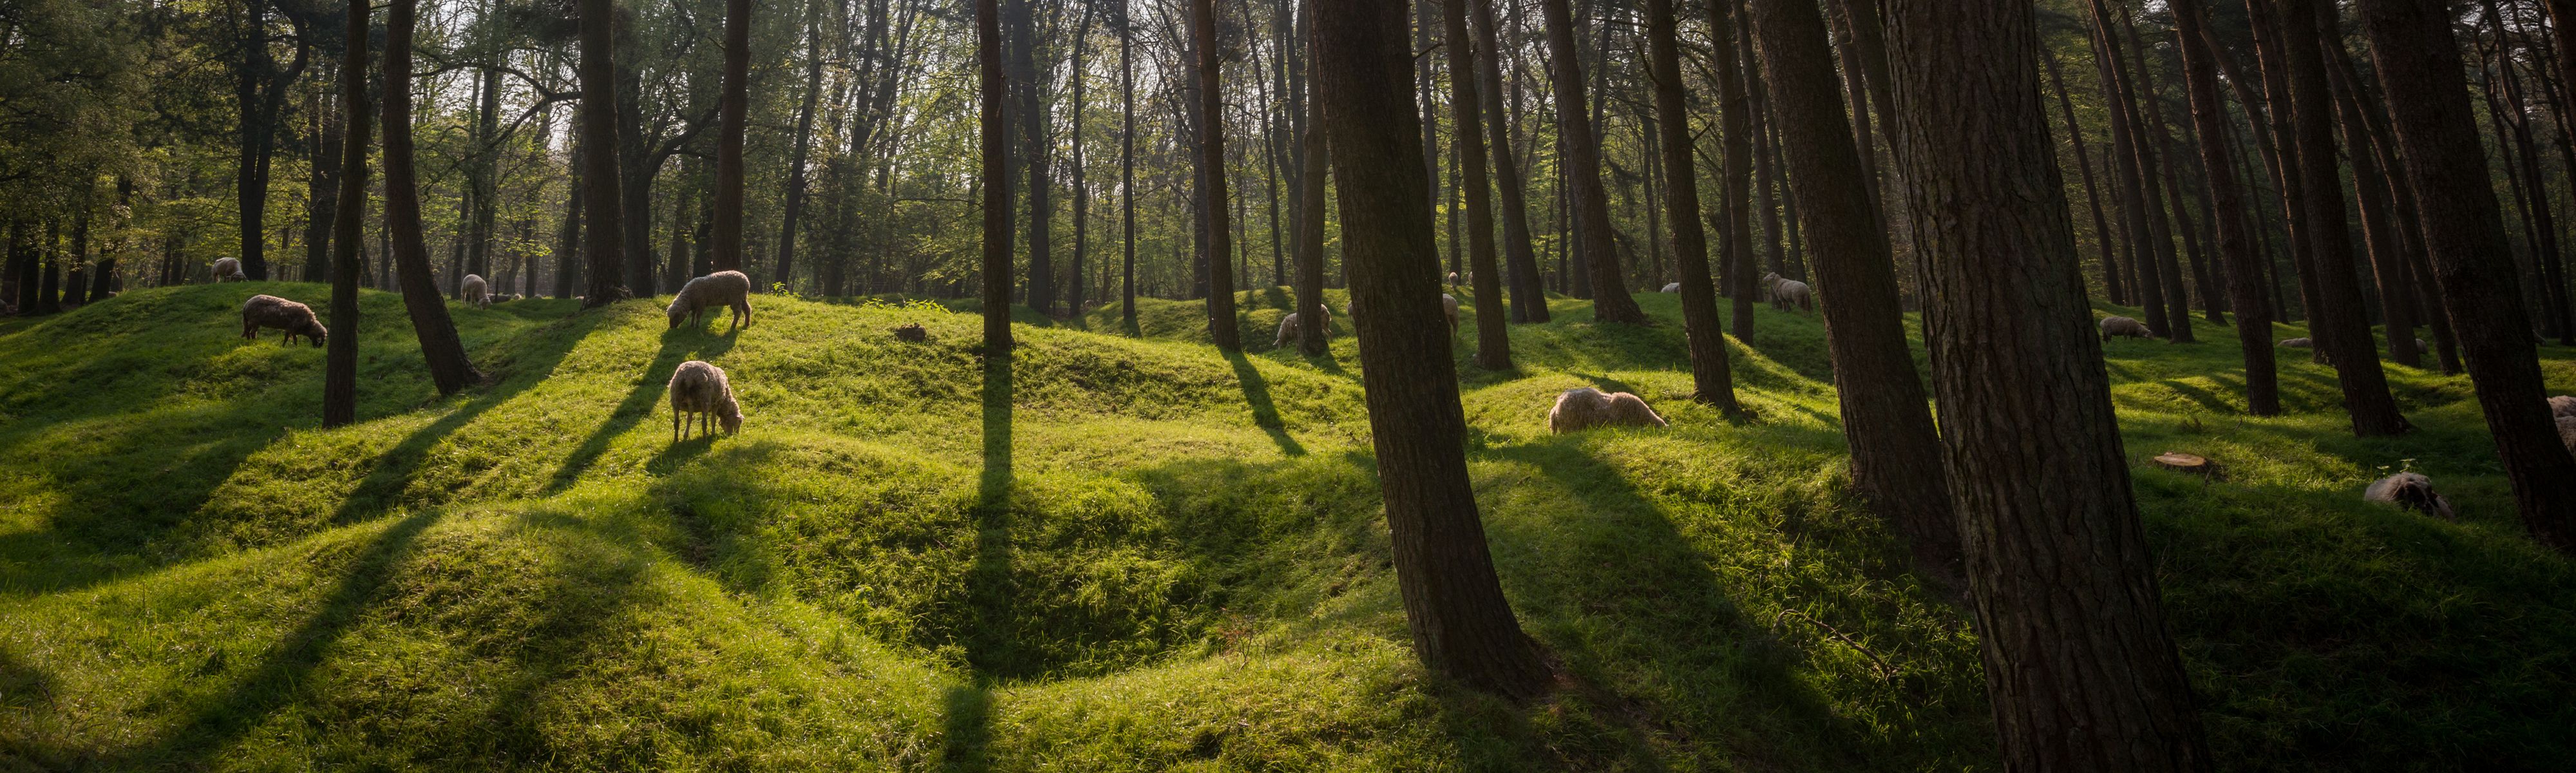 sheep grazing in forest